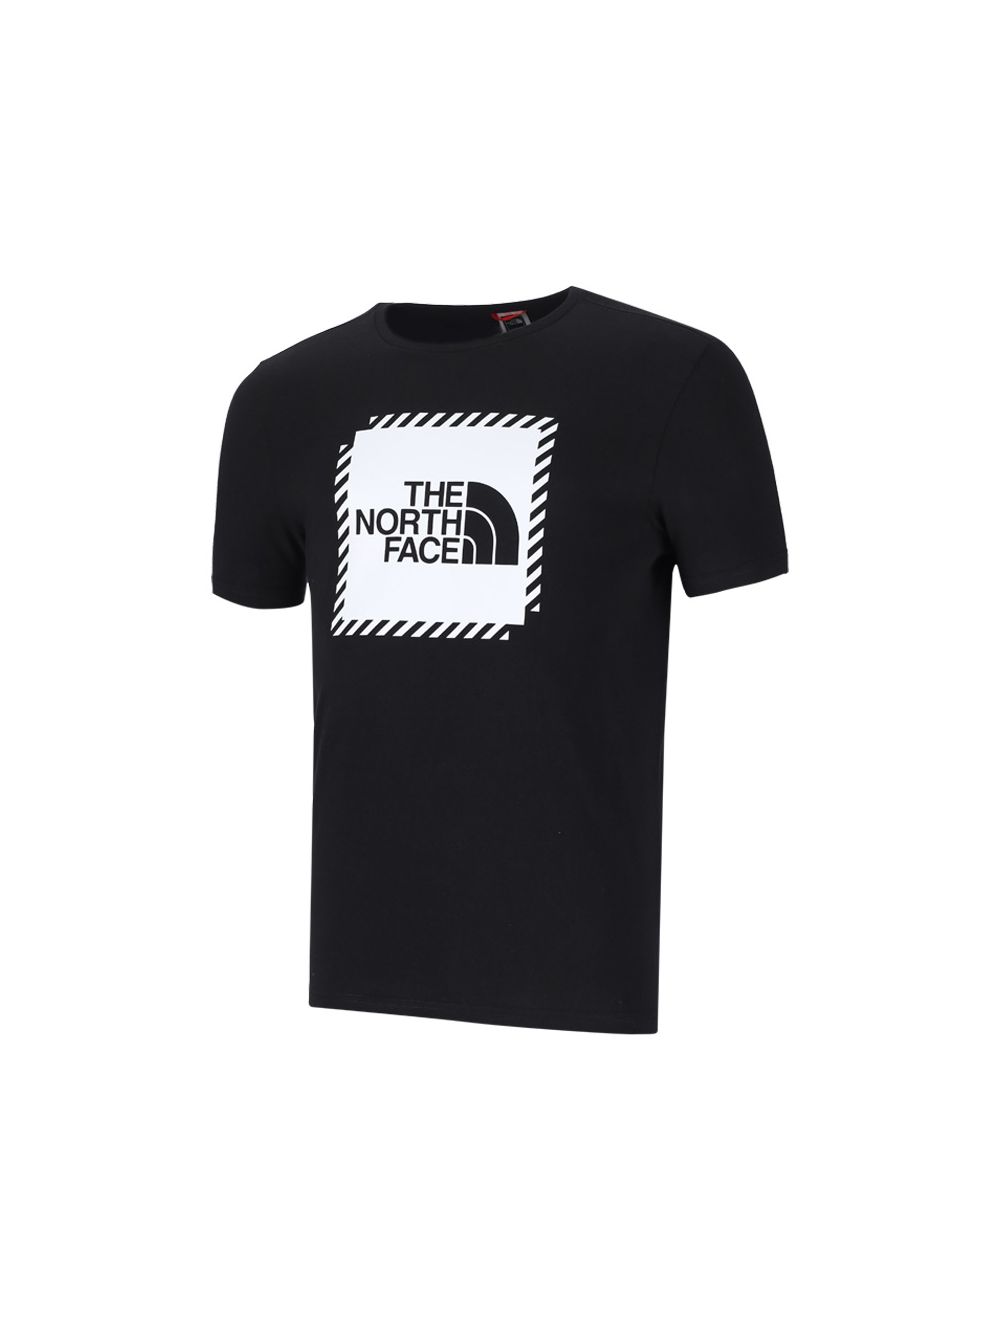 The North Face Biner Graphic 2 T-Shirt in Black